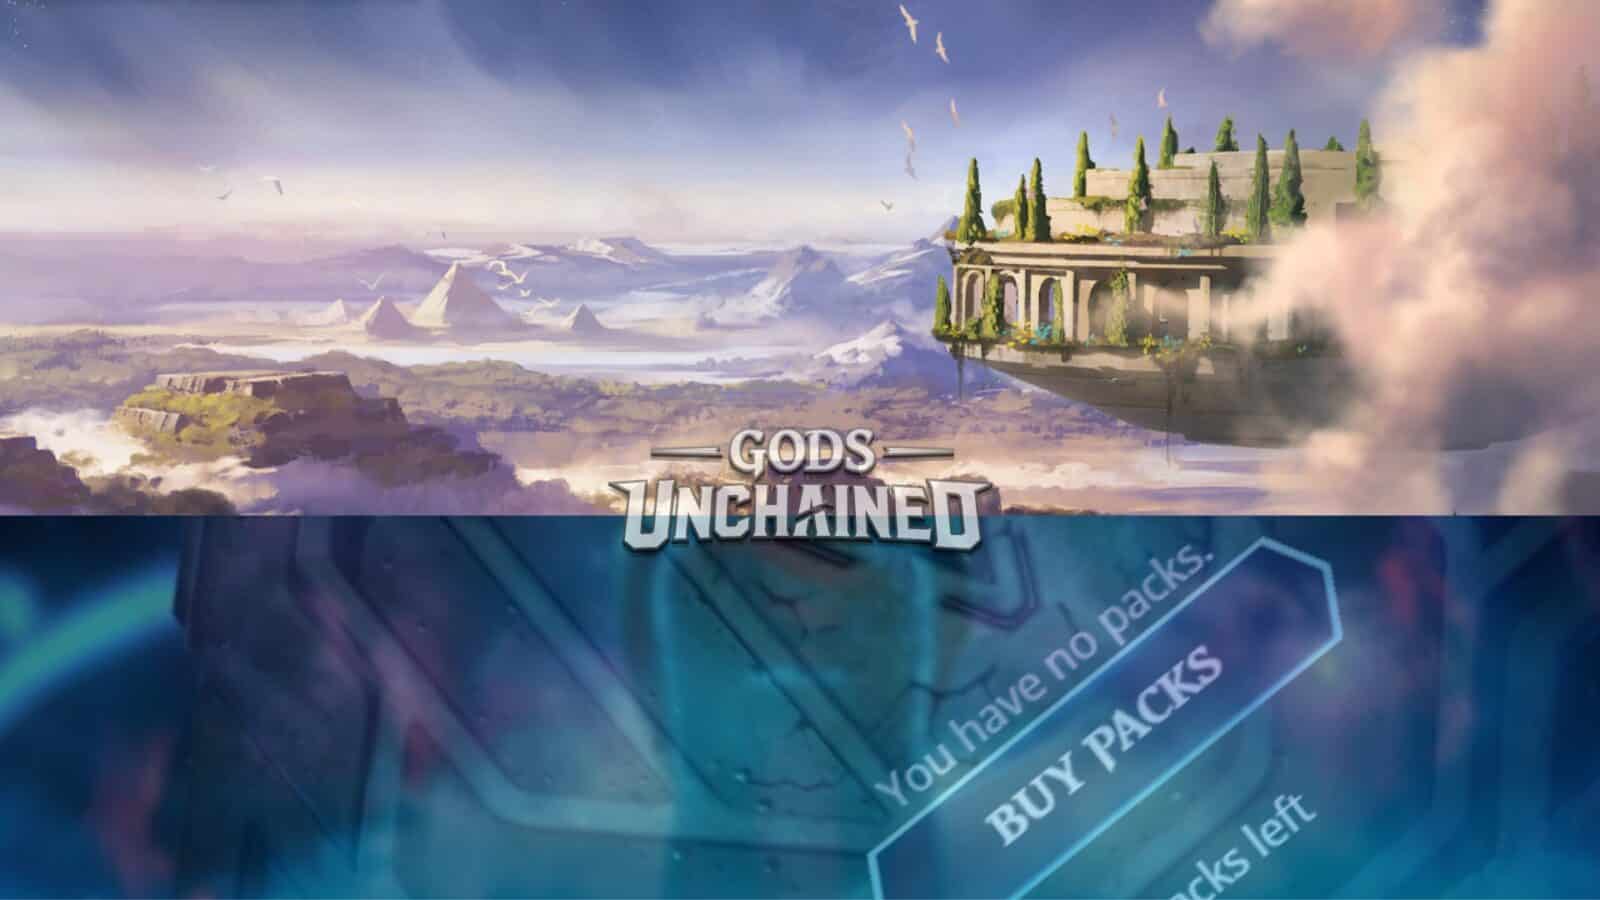 Gods Unchained Upgrades Its Pack Opening Feature Gods Unchained, a prominent player in the gaming industry, announced an extensive upgrade to its pack-opening experience. Aimed at enhancing user interaction and smoothing out gameplay, this fundamental revamp is set to enrich the player experience.